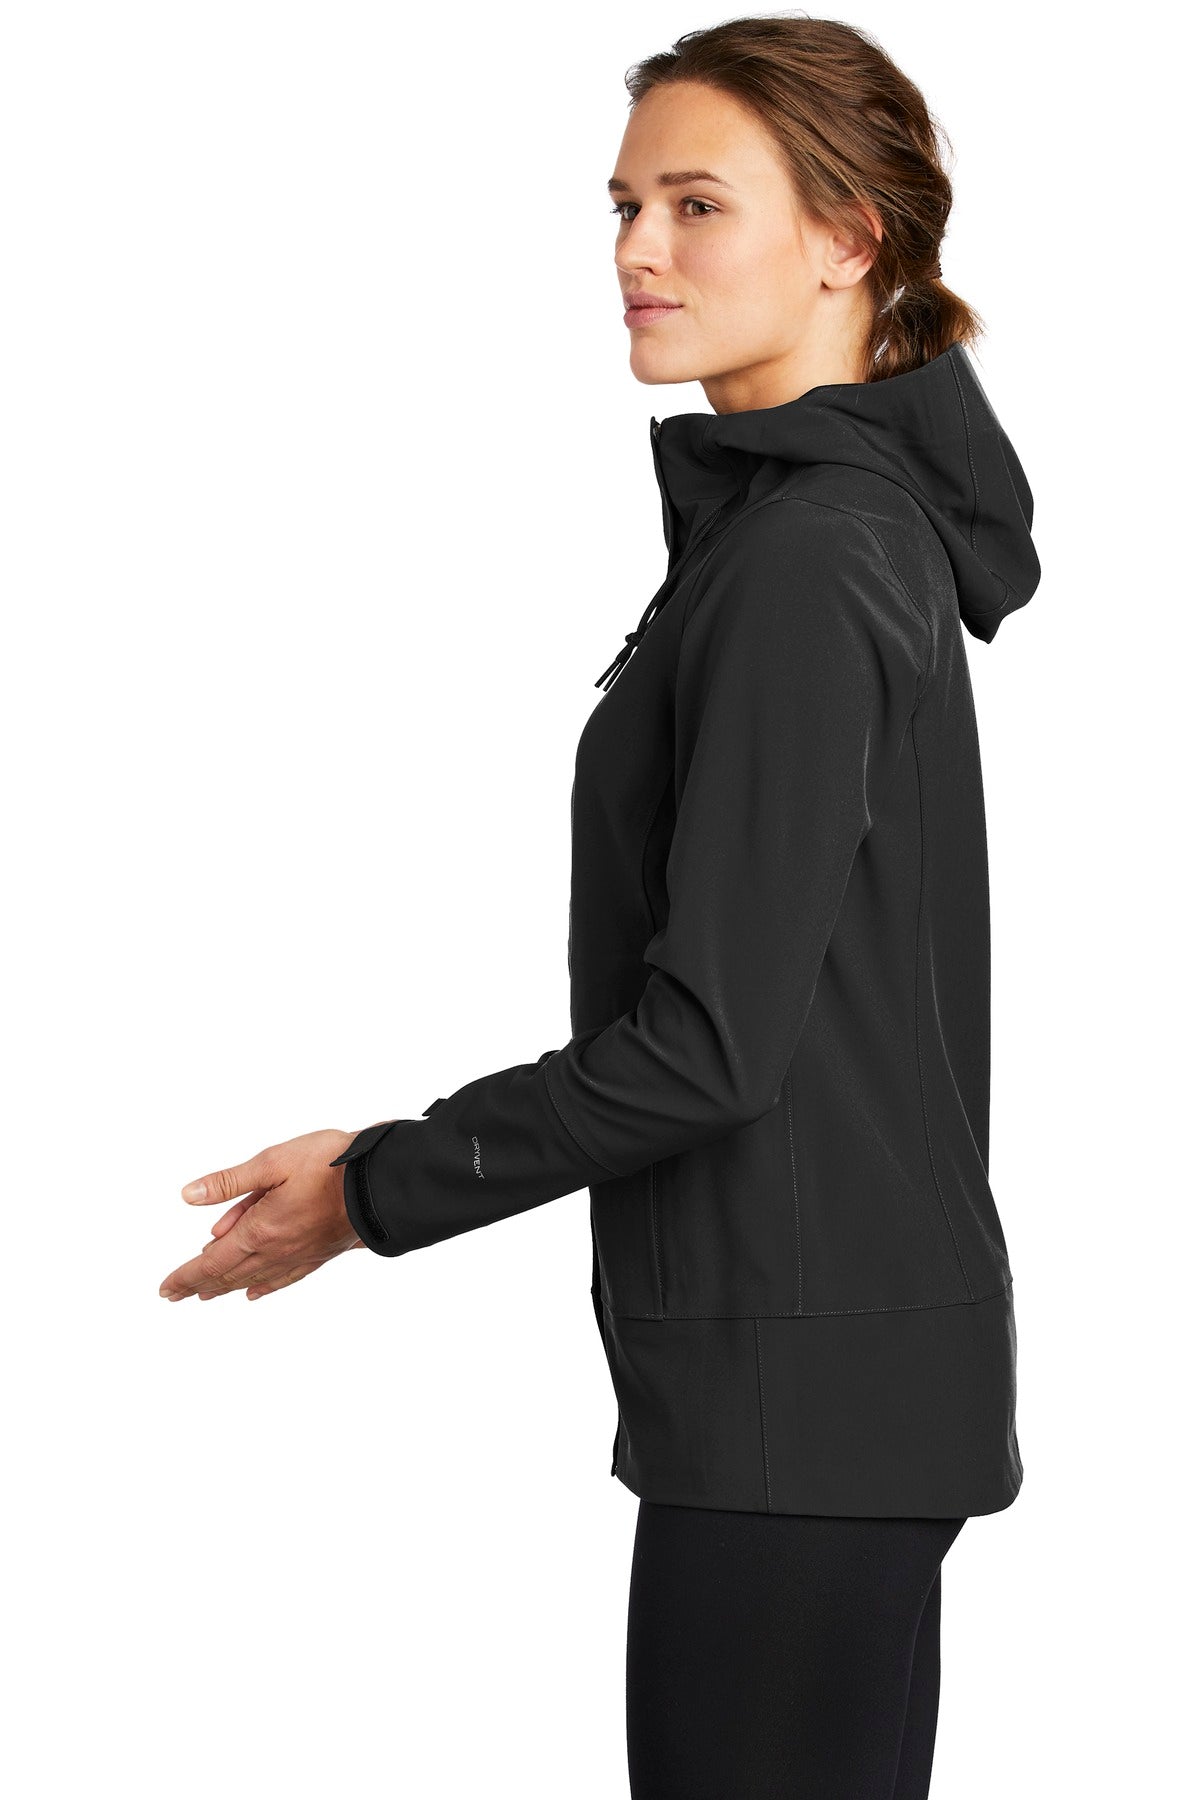 The North Face ® Ladies Apex DryVent ™ Jacket NF0A47FJ - DFW Impression